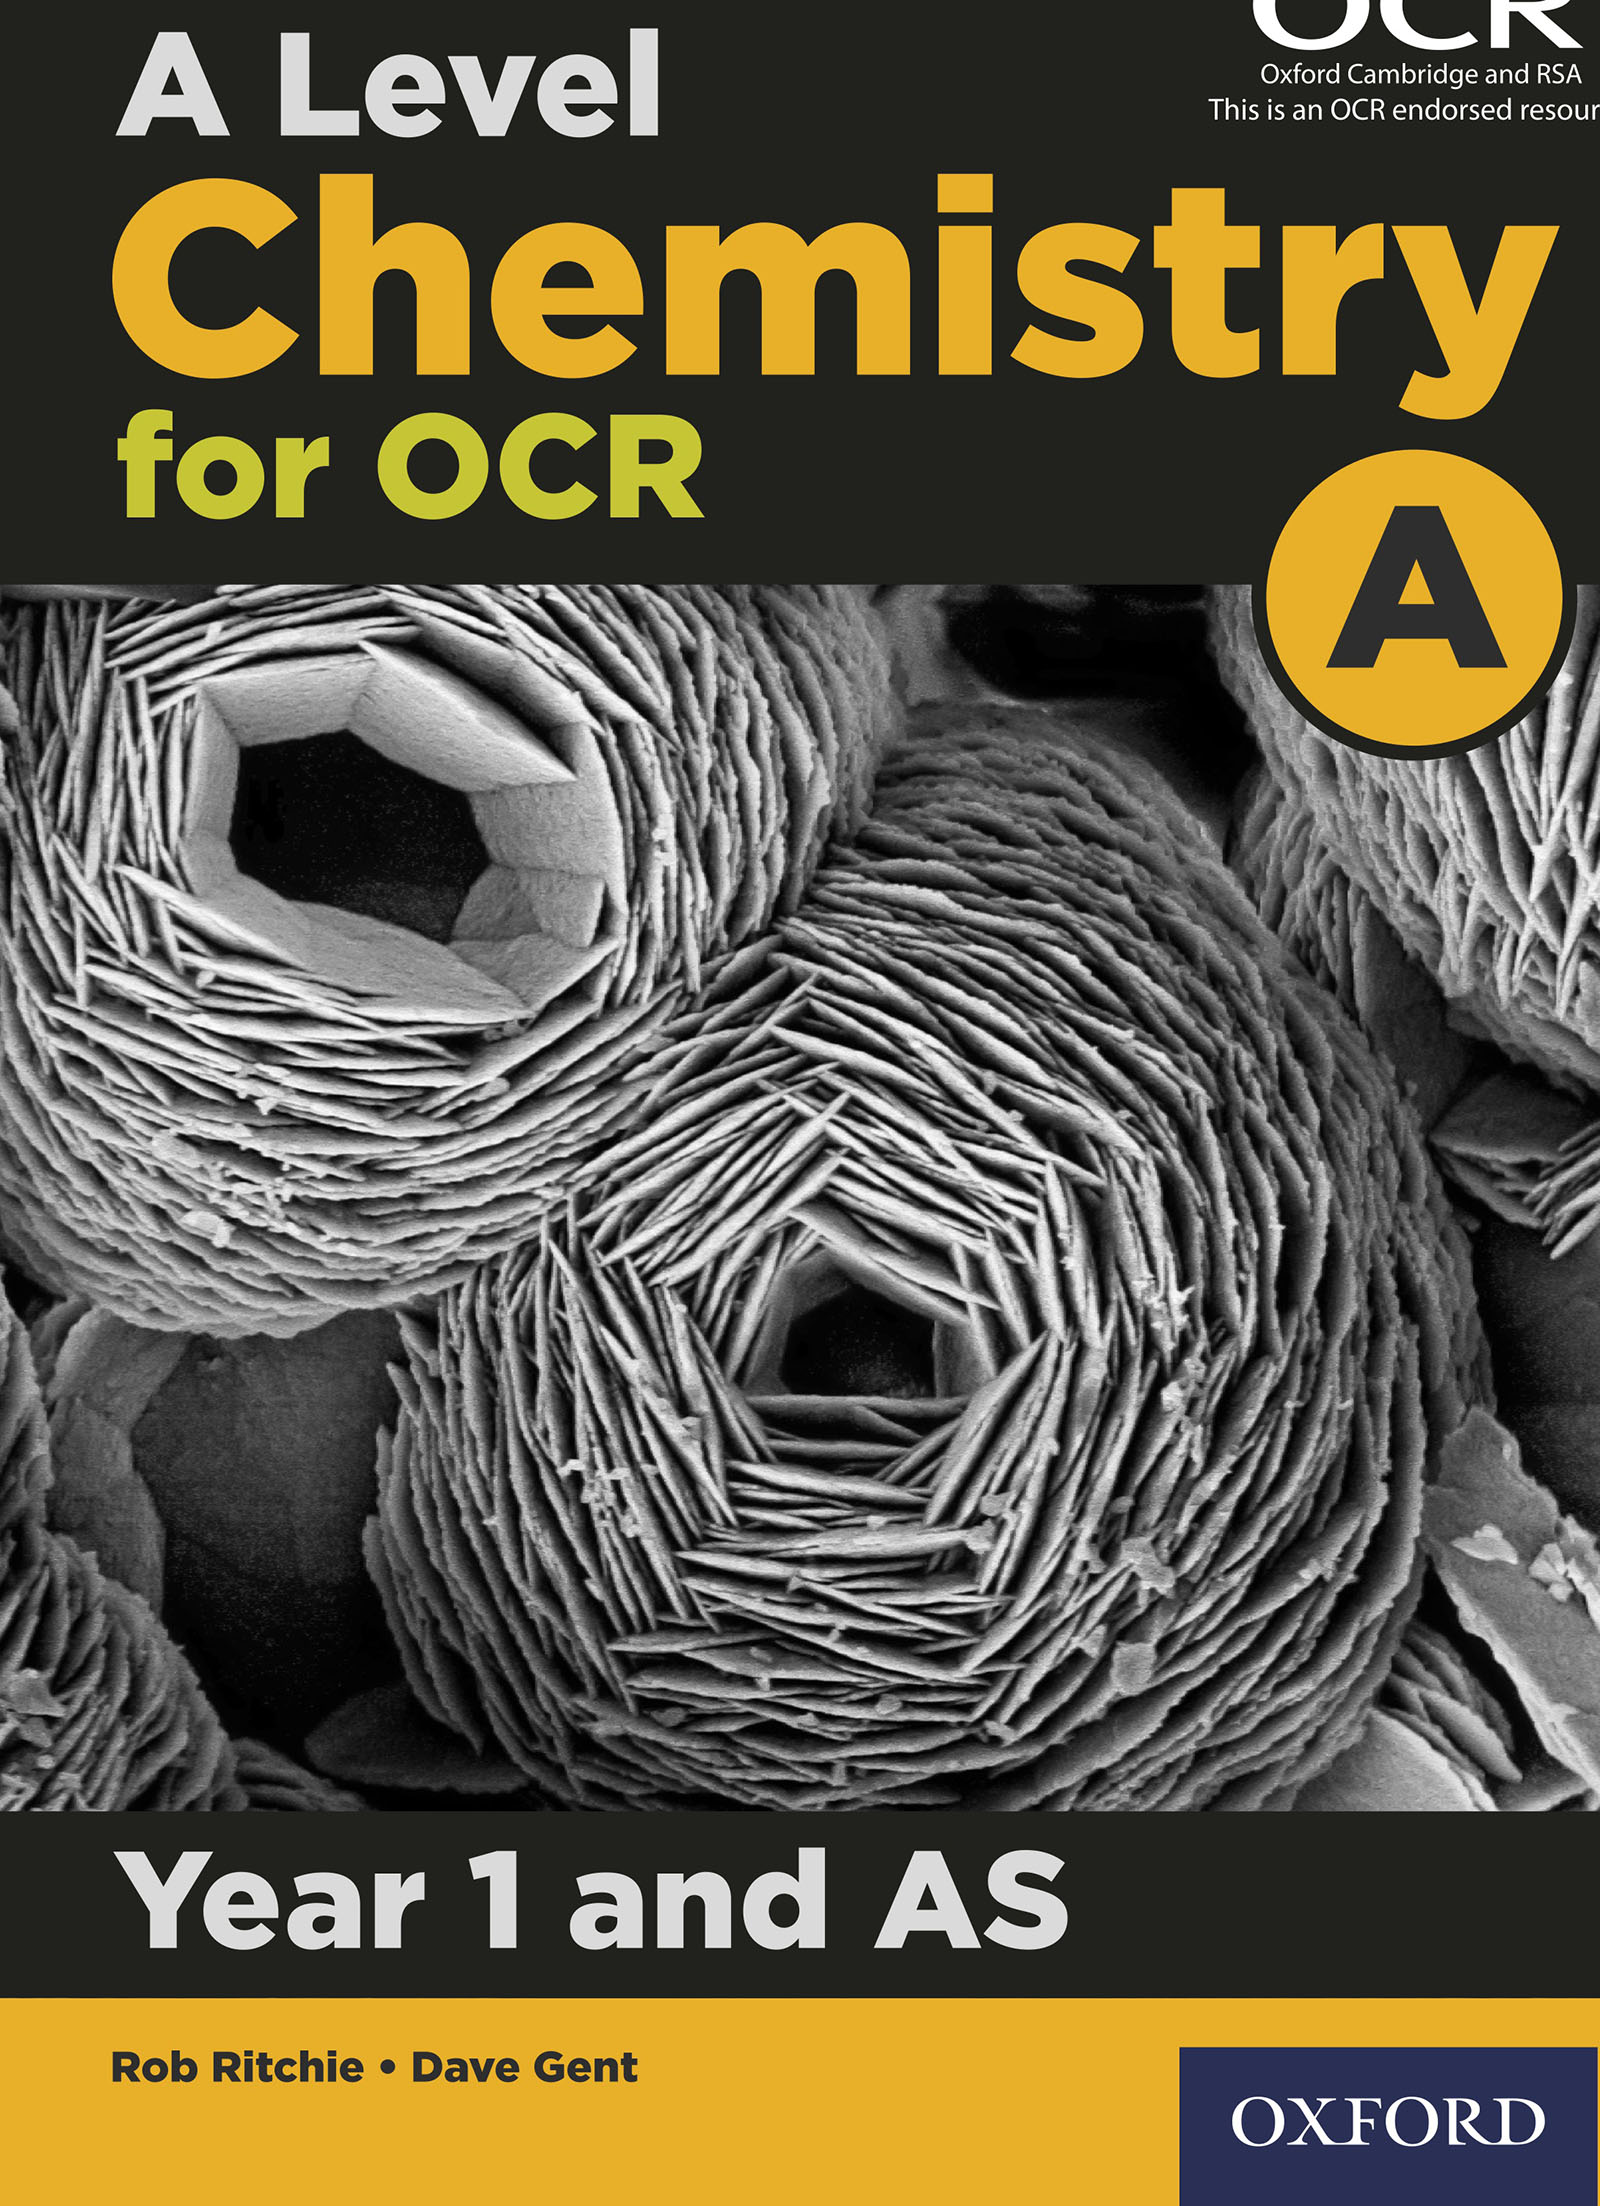 A Level Chemistry for OCR A: Year 1 and AS